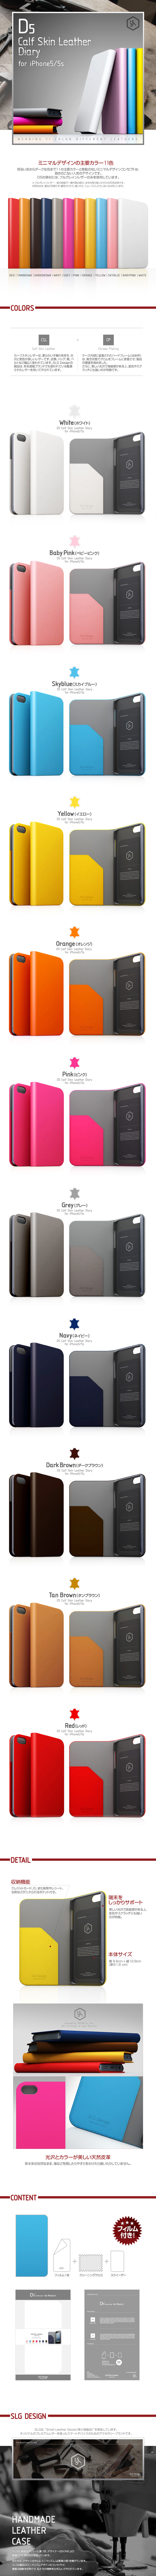 iPhone5/5s D4 Matal Leather Diary